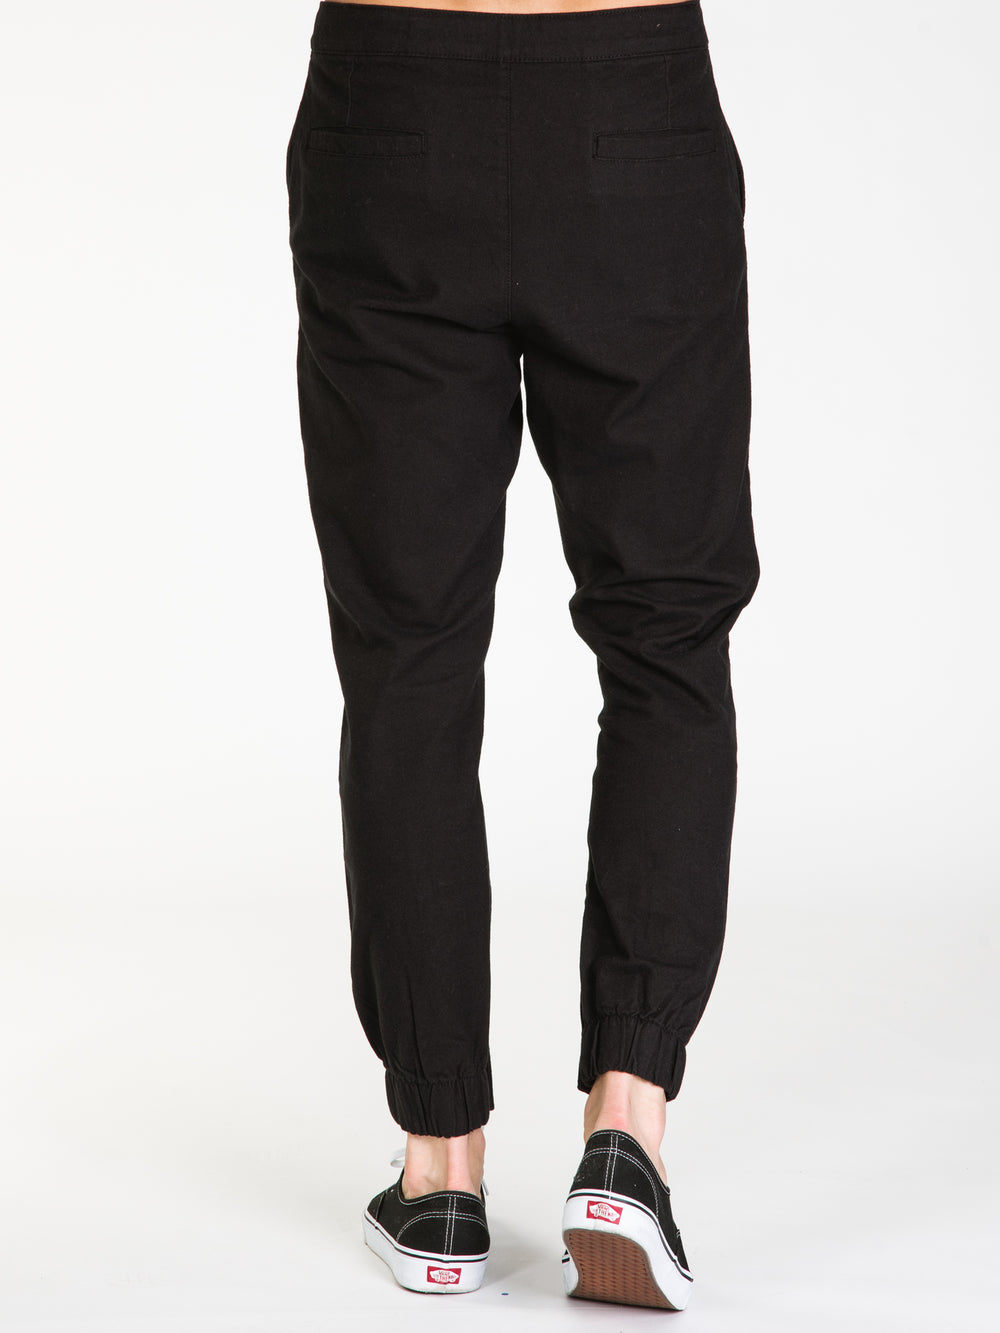 TAINTED TEXTURED JOGGER - CLEARANCE